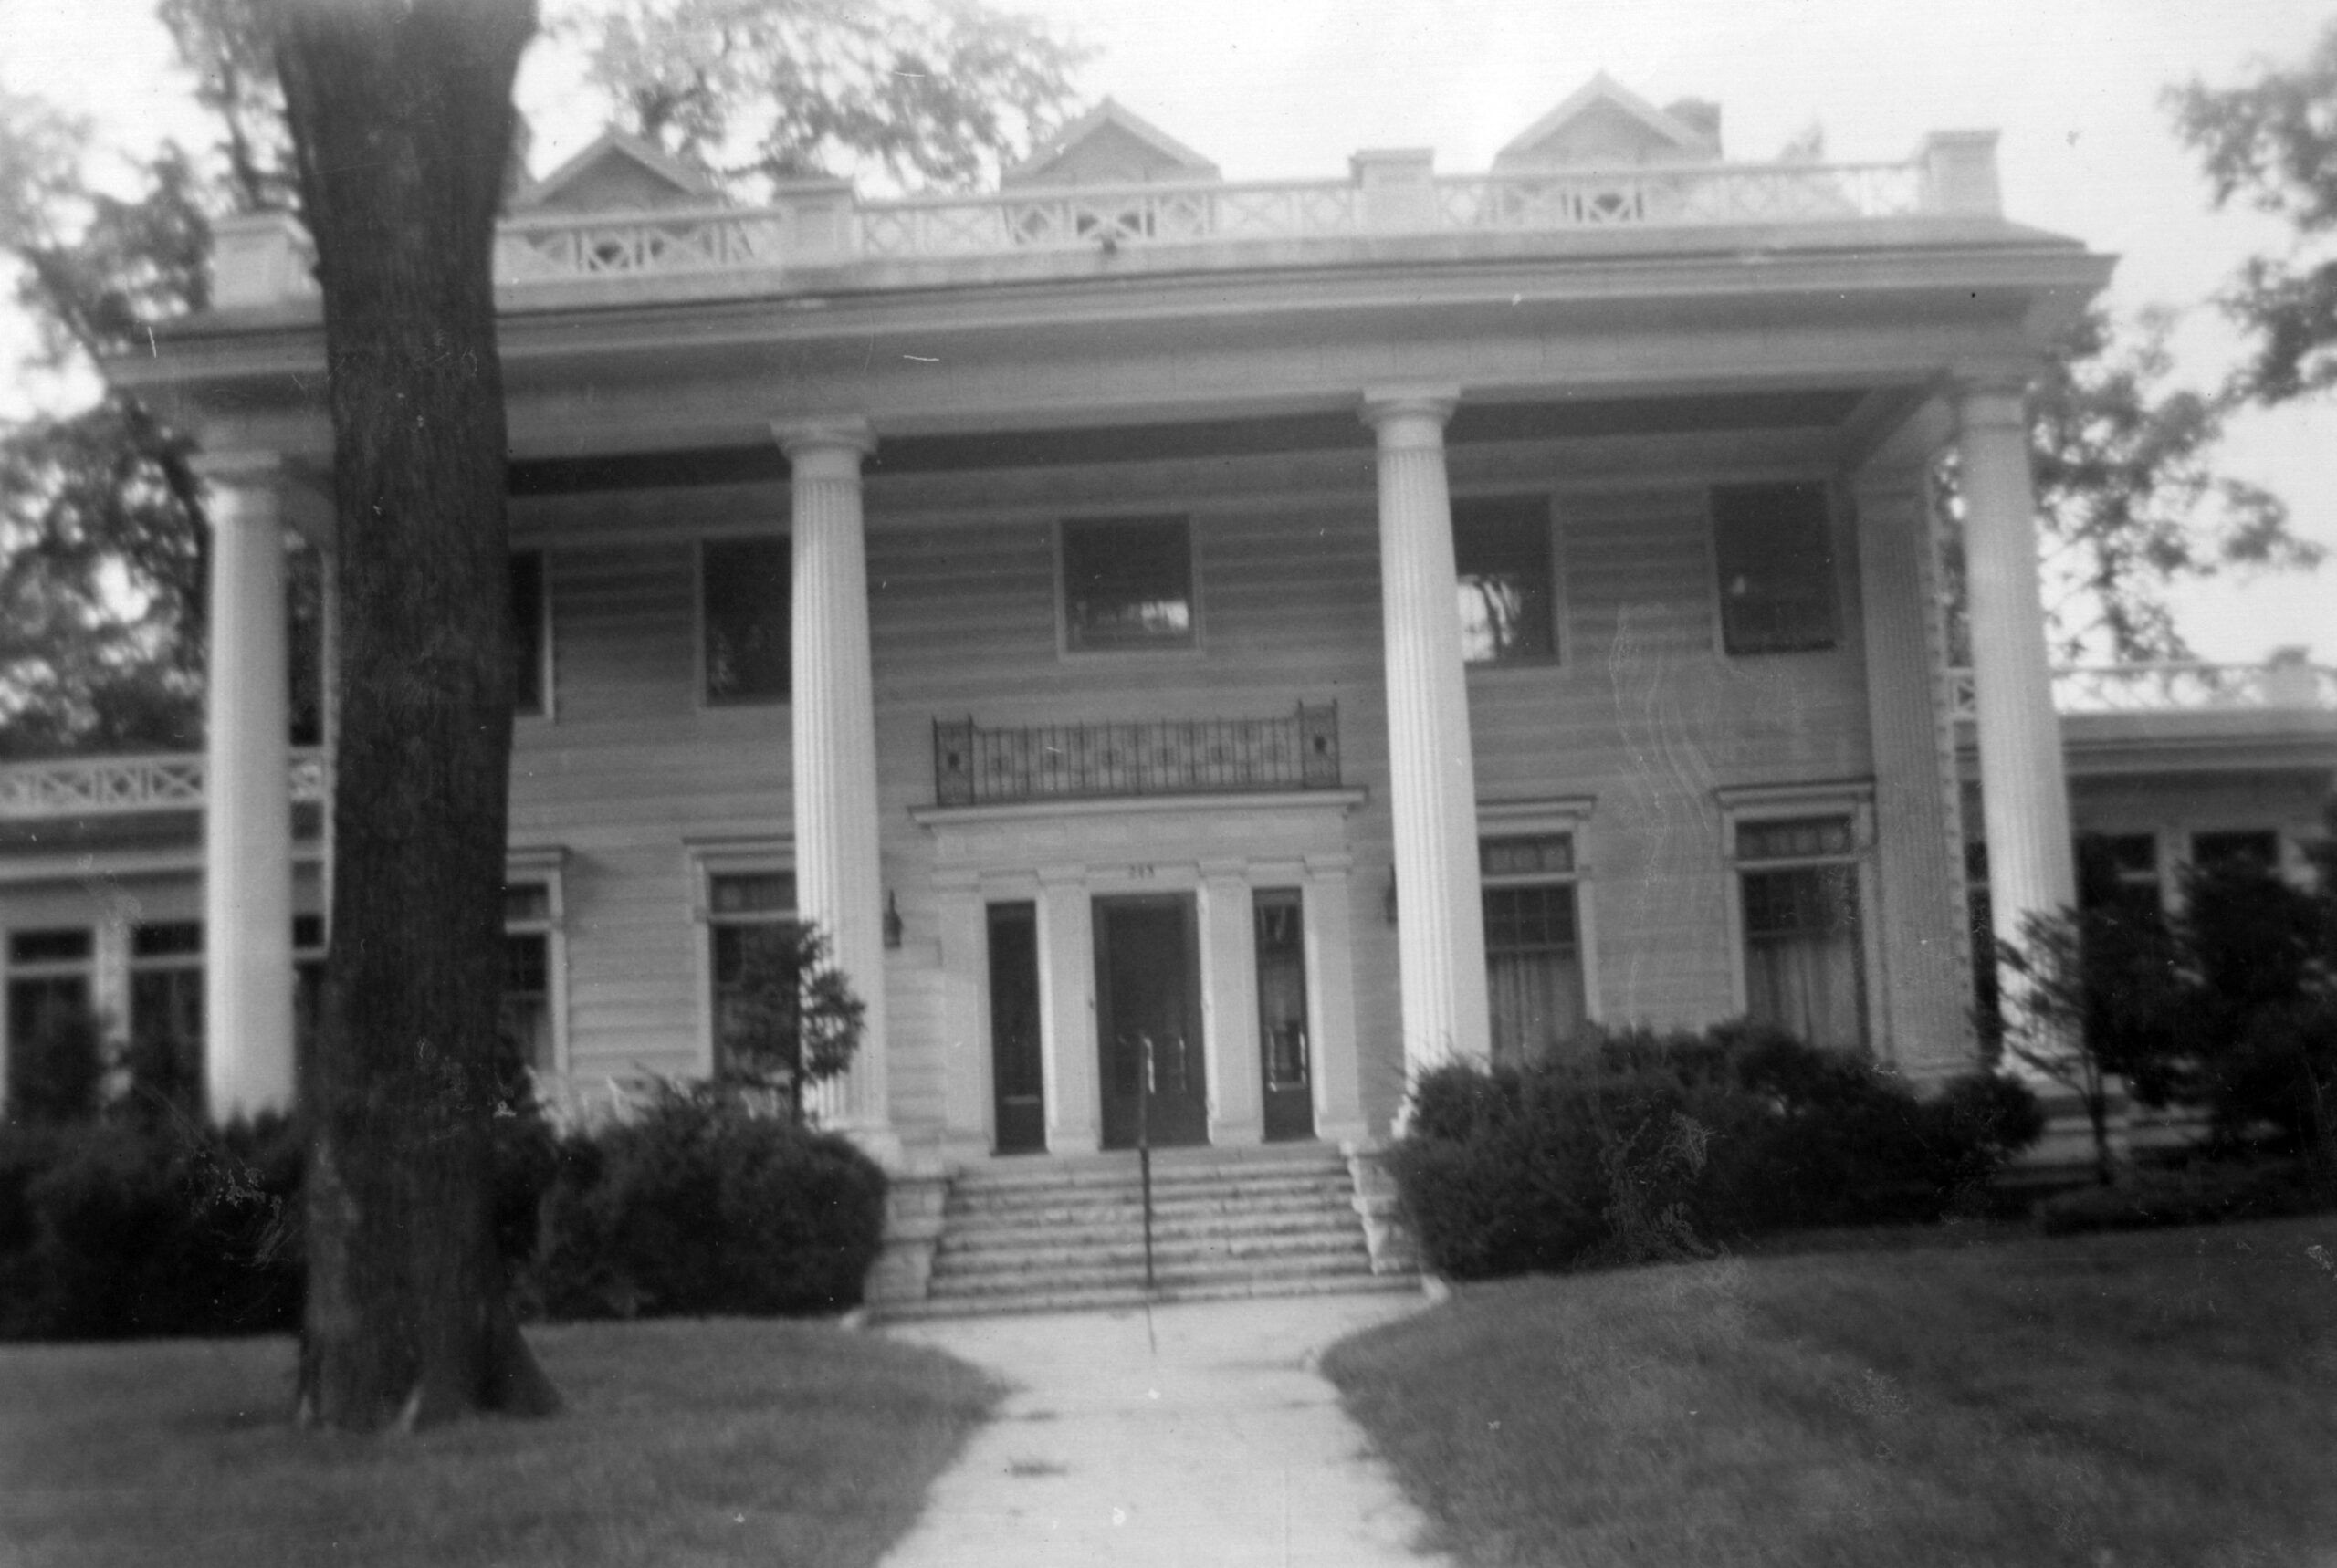 Hazotte Hall, first residence for Marian College students, located on Division Street, 1960s.